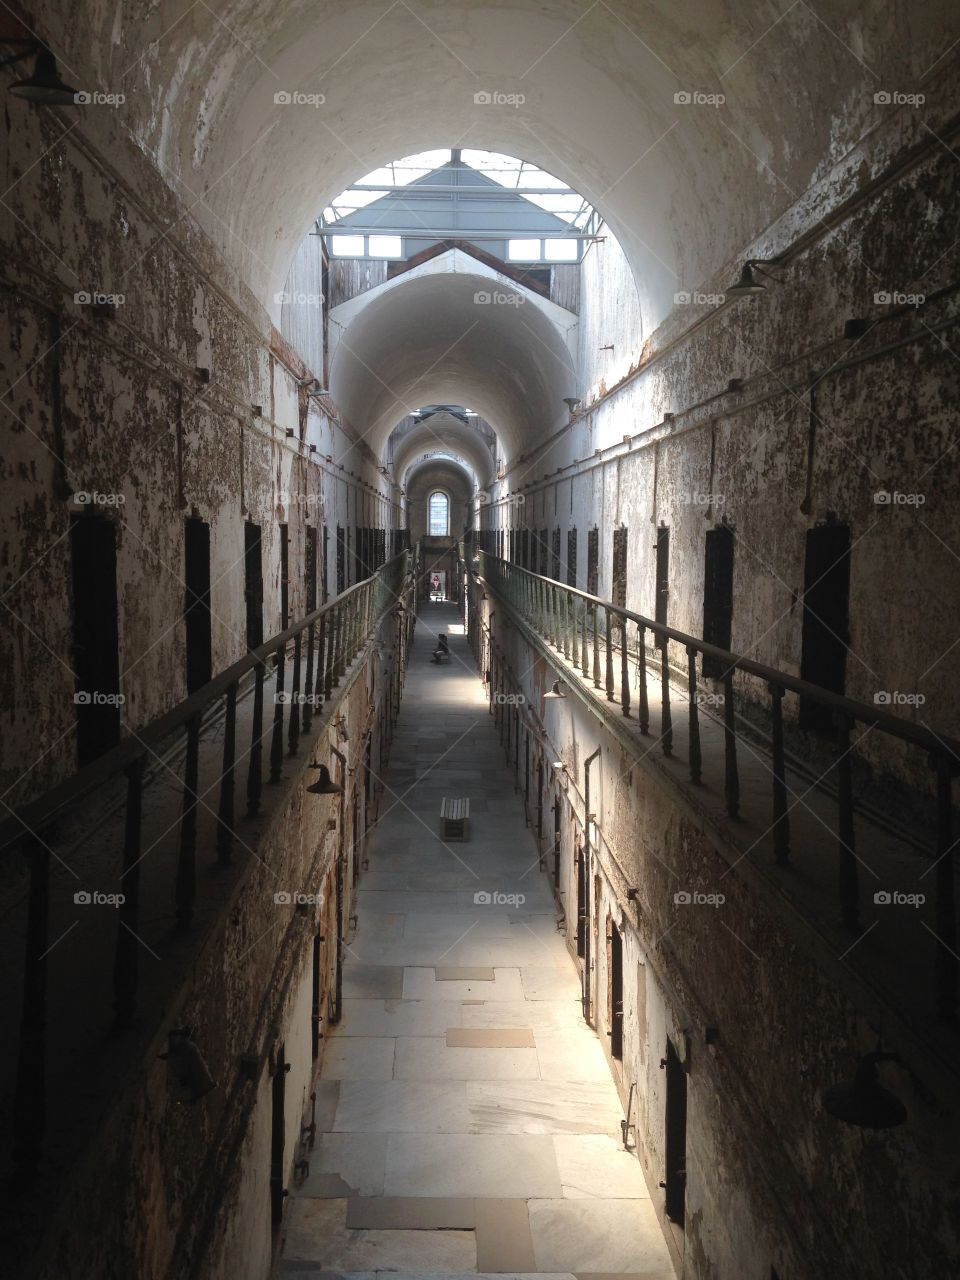 Old Penitentiary Cell Block . Interior of a cell block in the world's oldest modern prison, Eastern State Penitentiary, in Philadelphia 